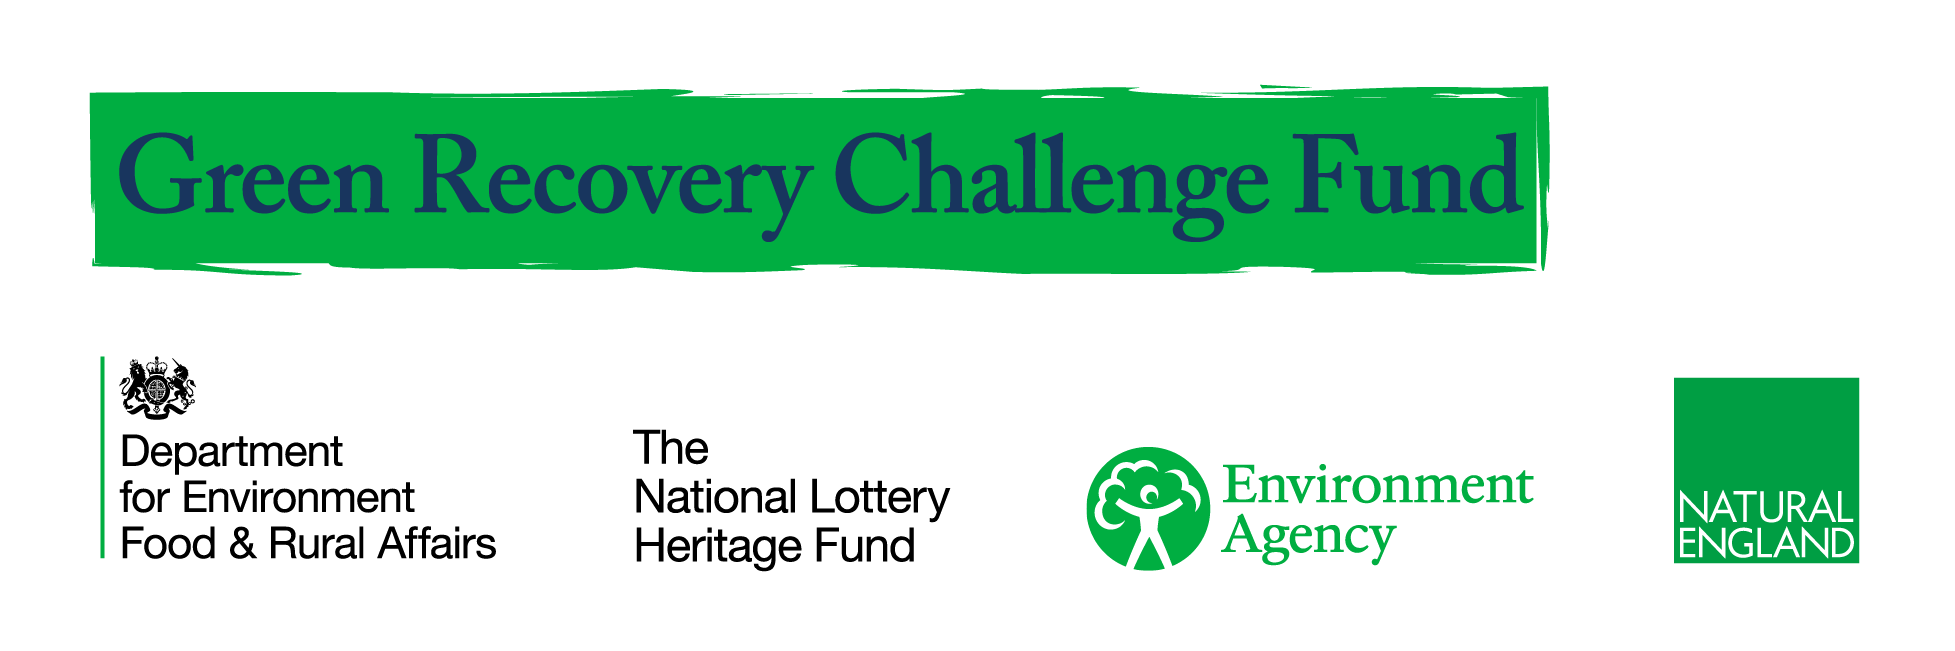 Green Recovery Challenge